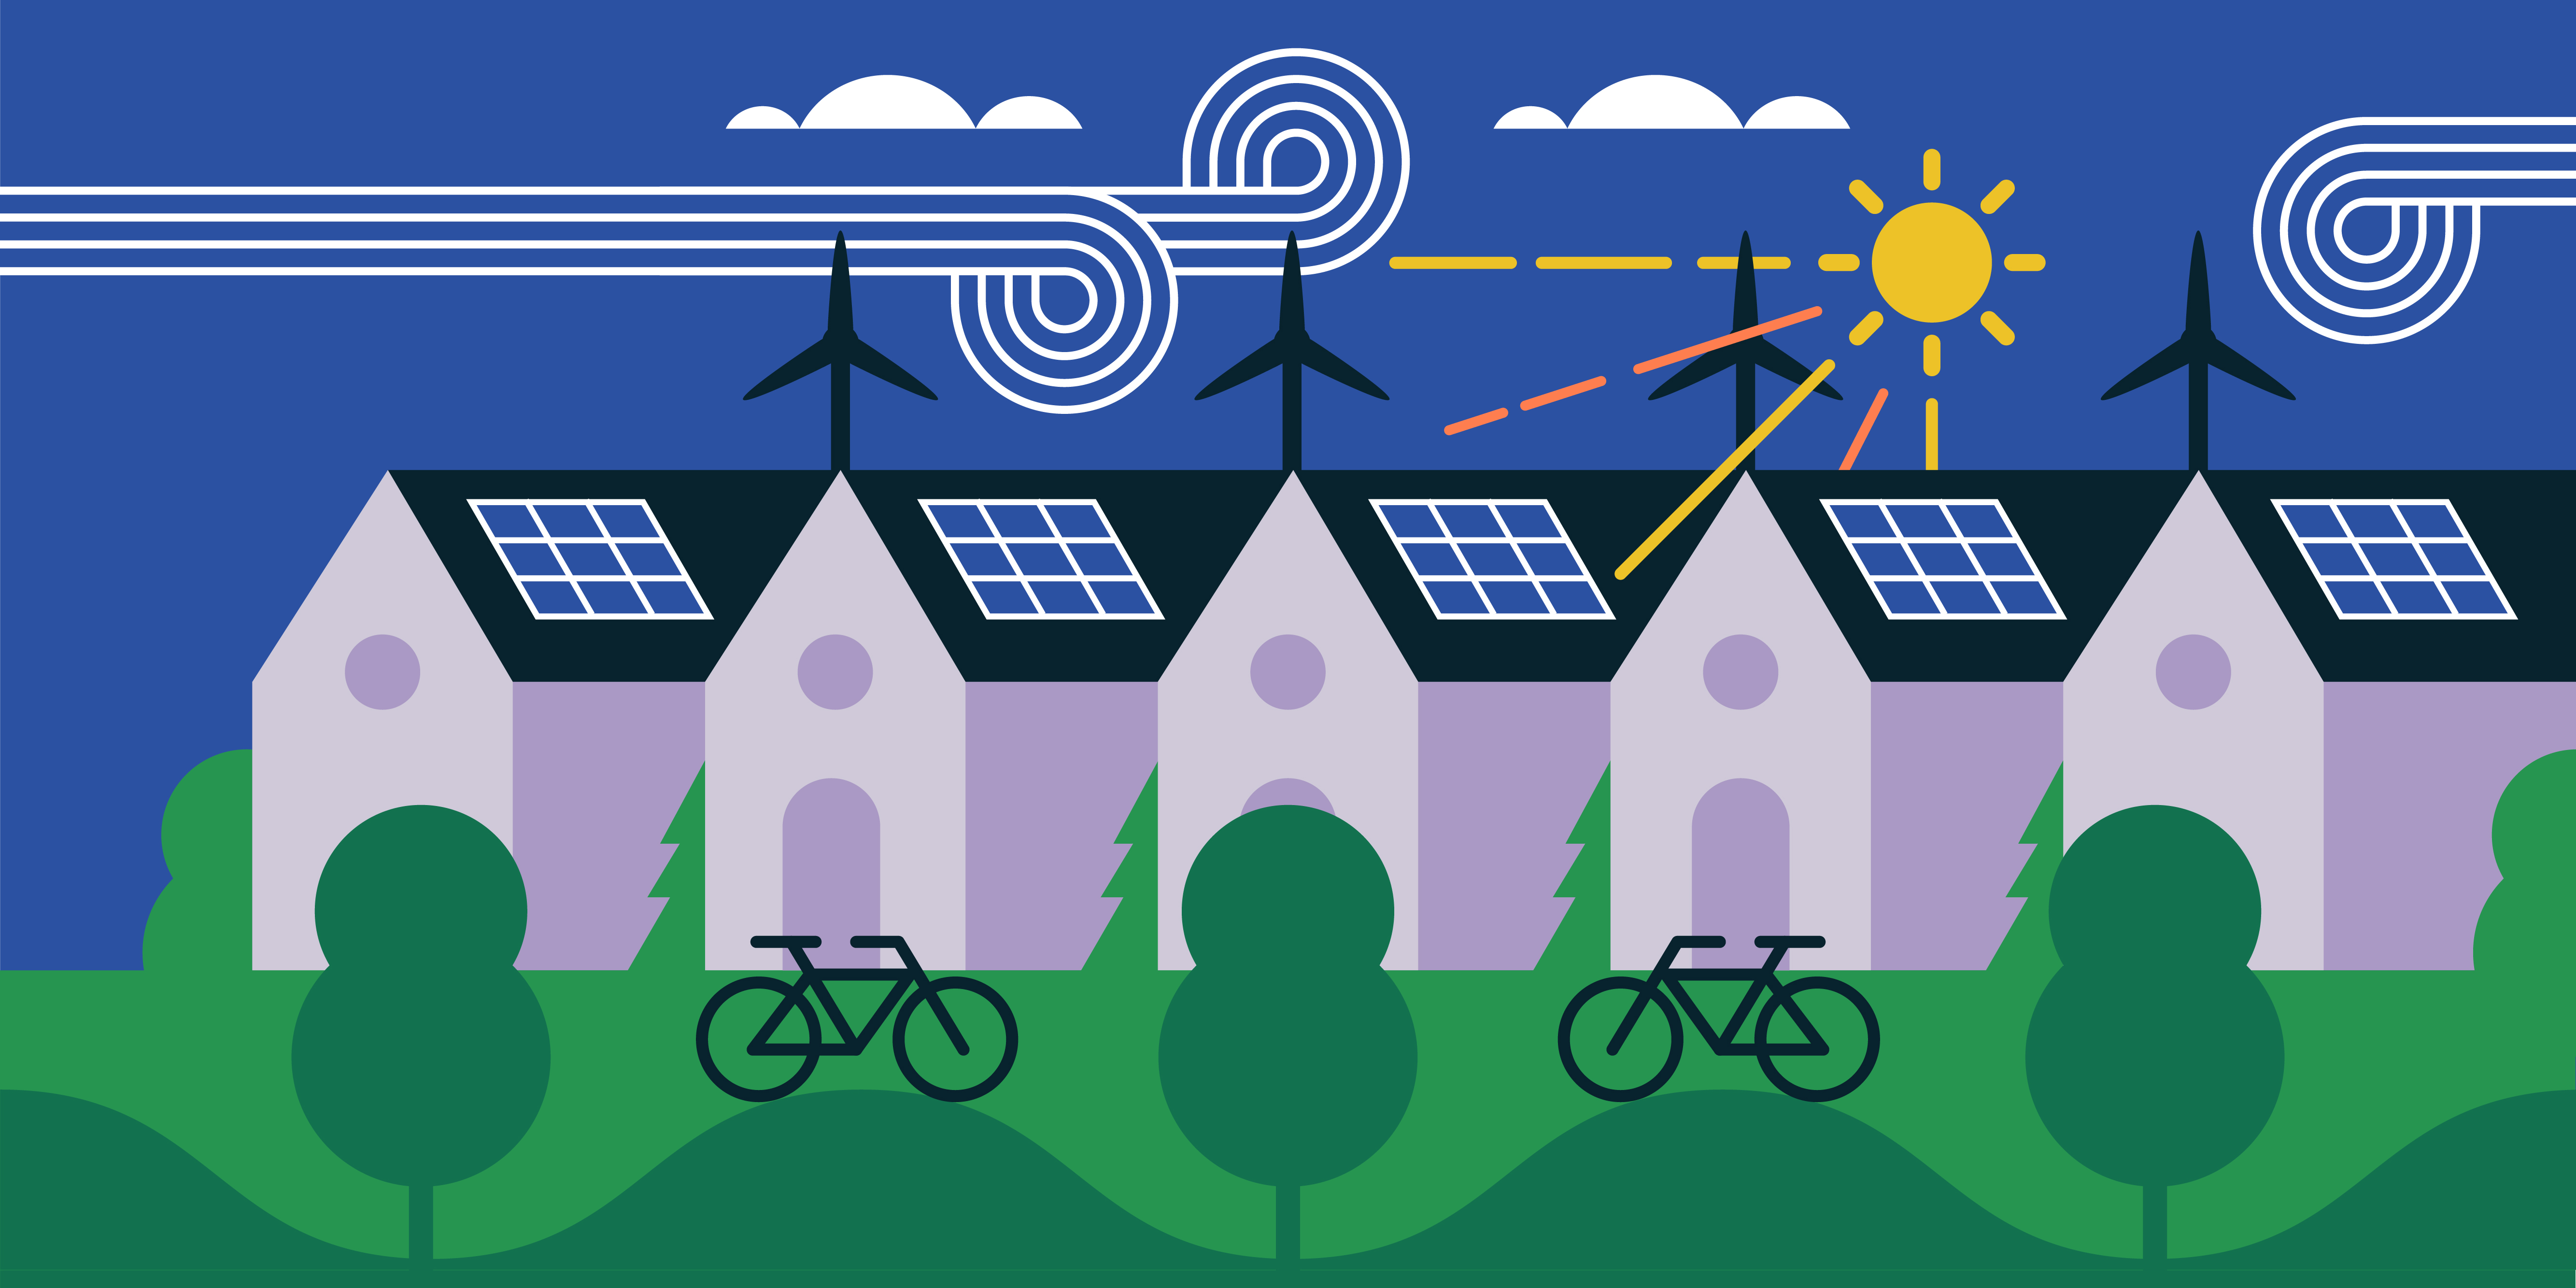 Power to the people: communities working together for better energy use